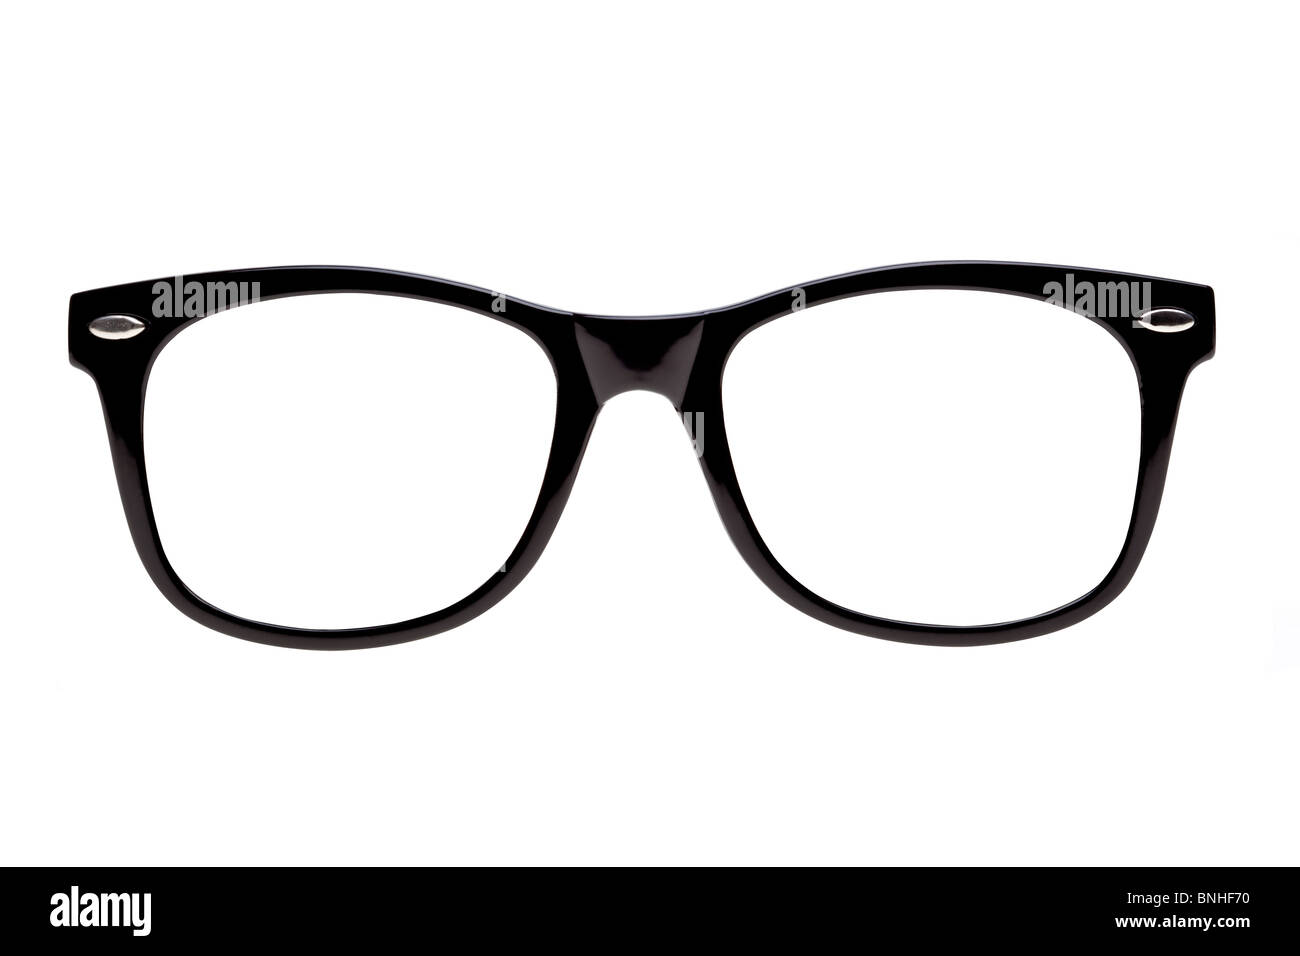 Photo of Black spectacle frames the type of glasses nerds wear, isolated on white with clipping paths for the frames and lenses Stock Photo